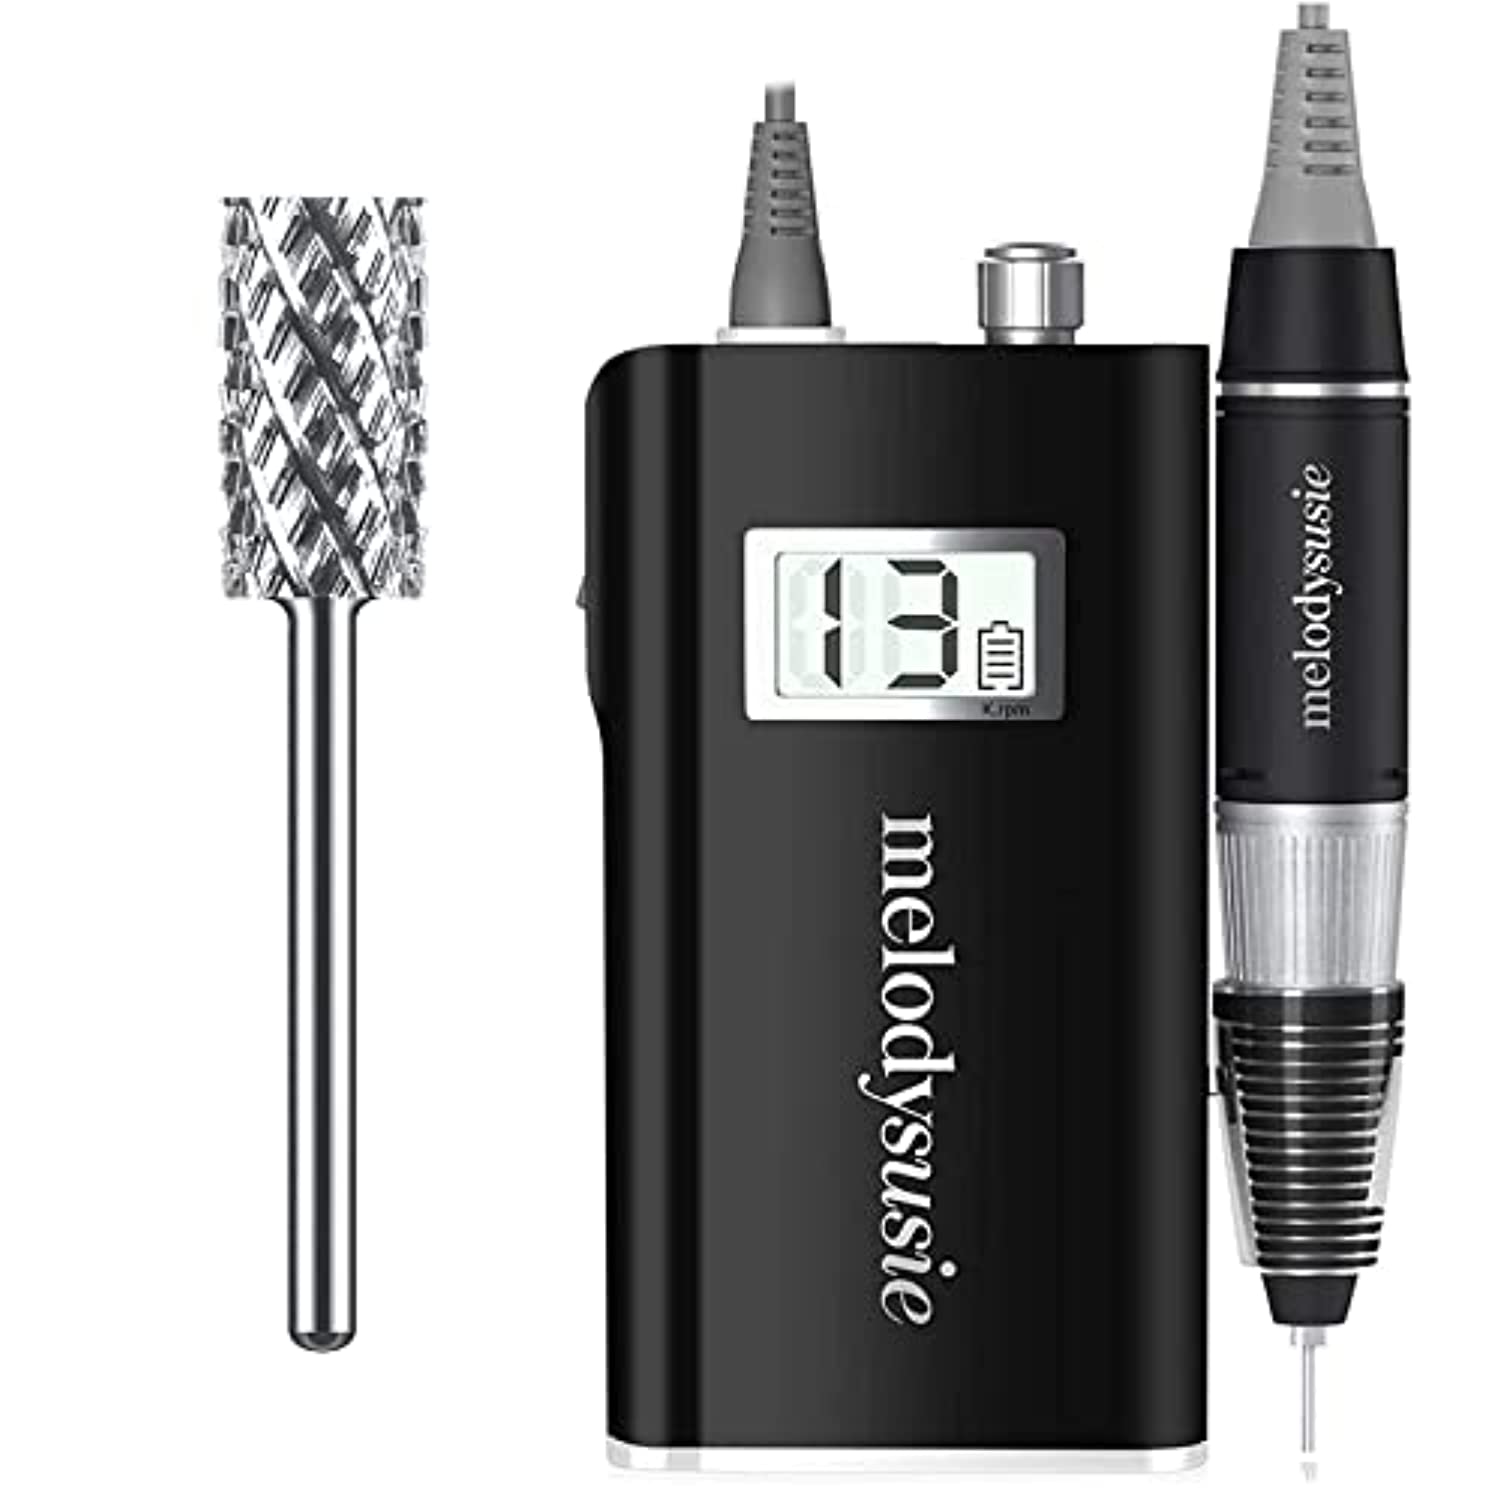 MelodySusie Professional Rechargeable 30000 rpm Nail Drill with Professional Nail Drill Bit 4XC, Portable E-File with Long Life Battery, Electric Tool for Acrylic Nail Natural Extension Poly Nail Gel